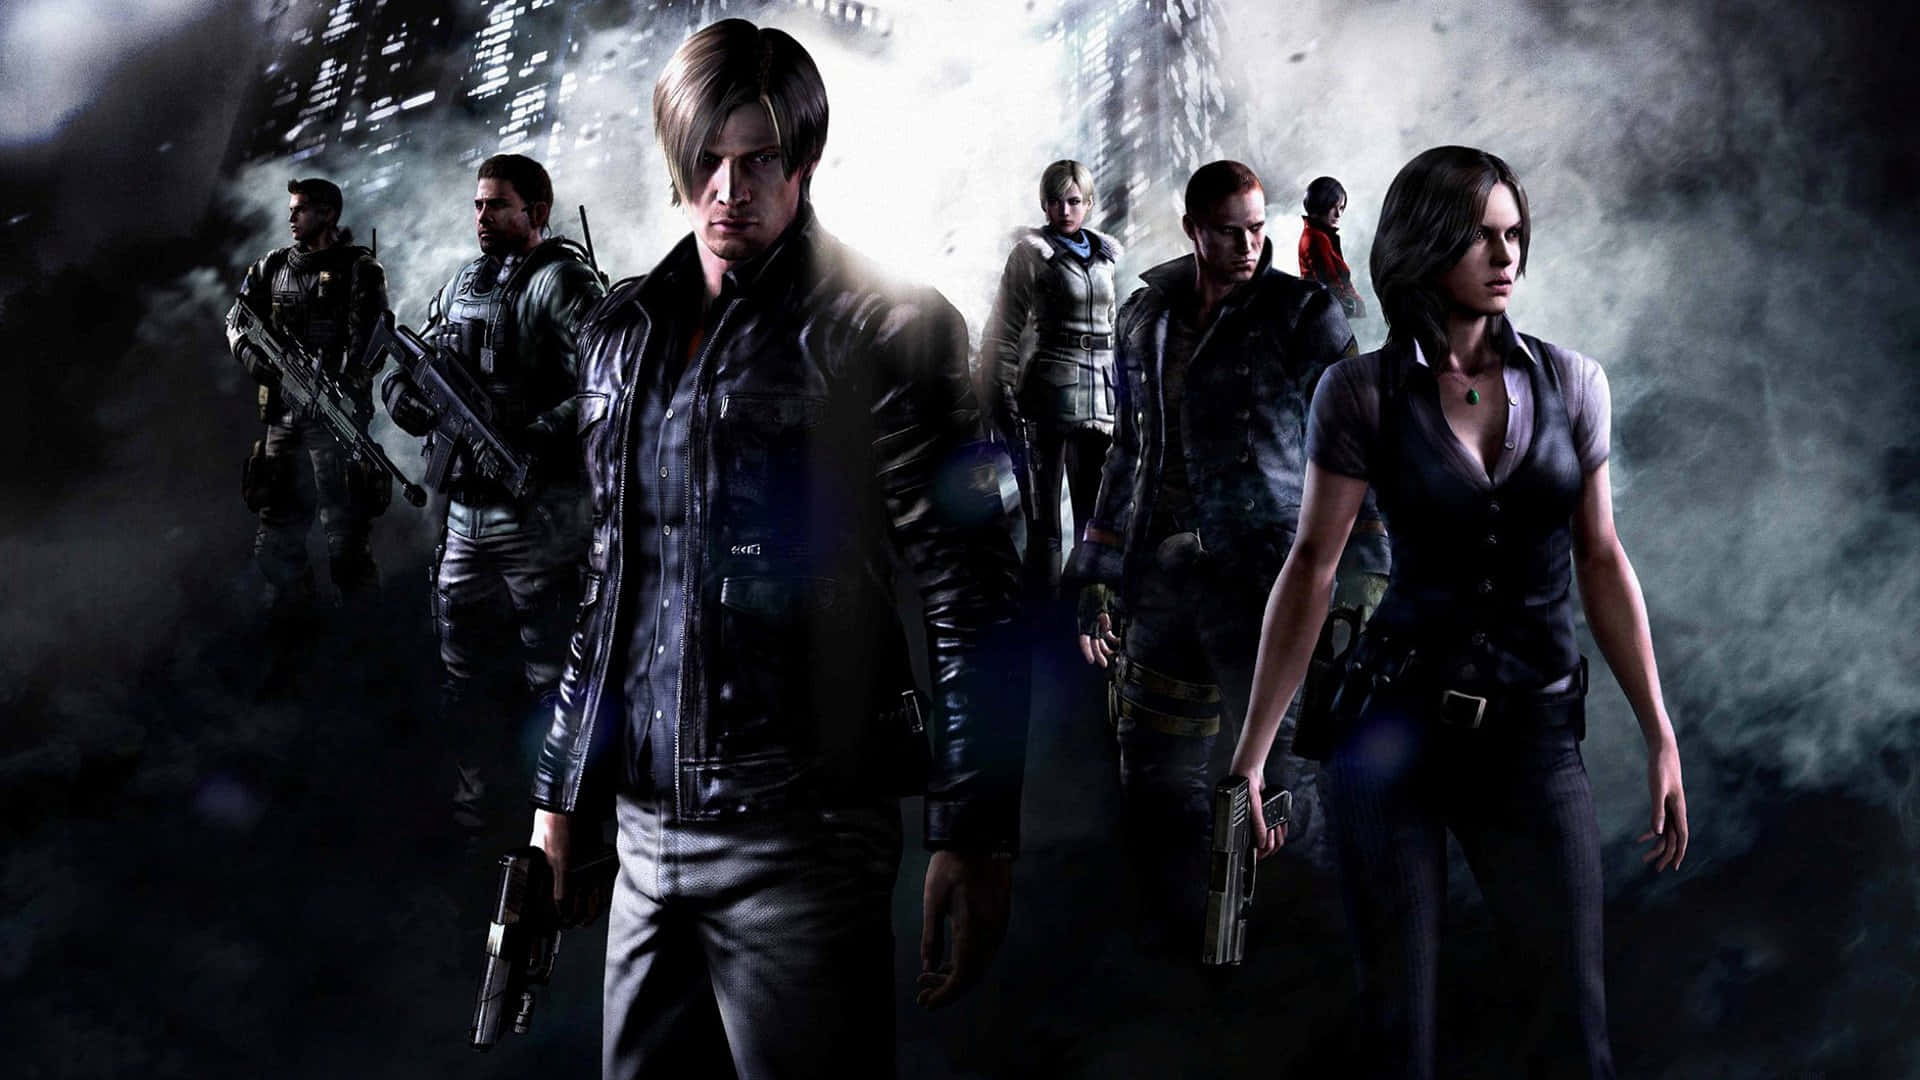 Caption: Iconic Resident Evil characters featured in an action-packed scene